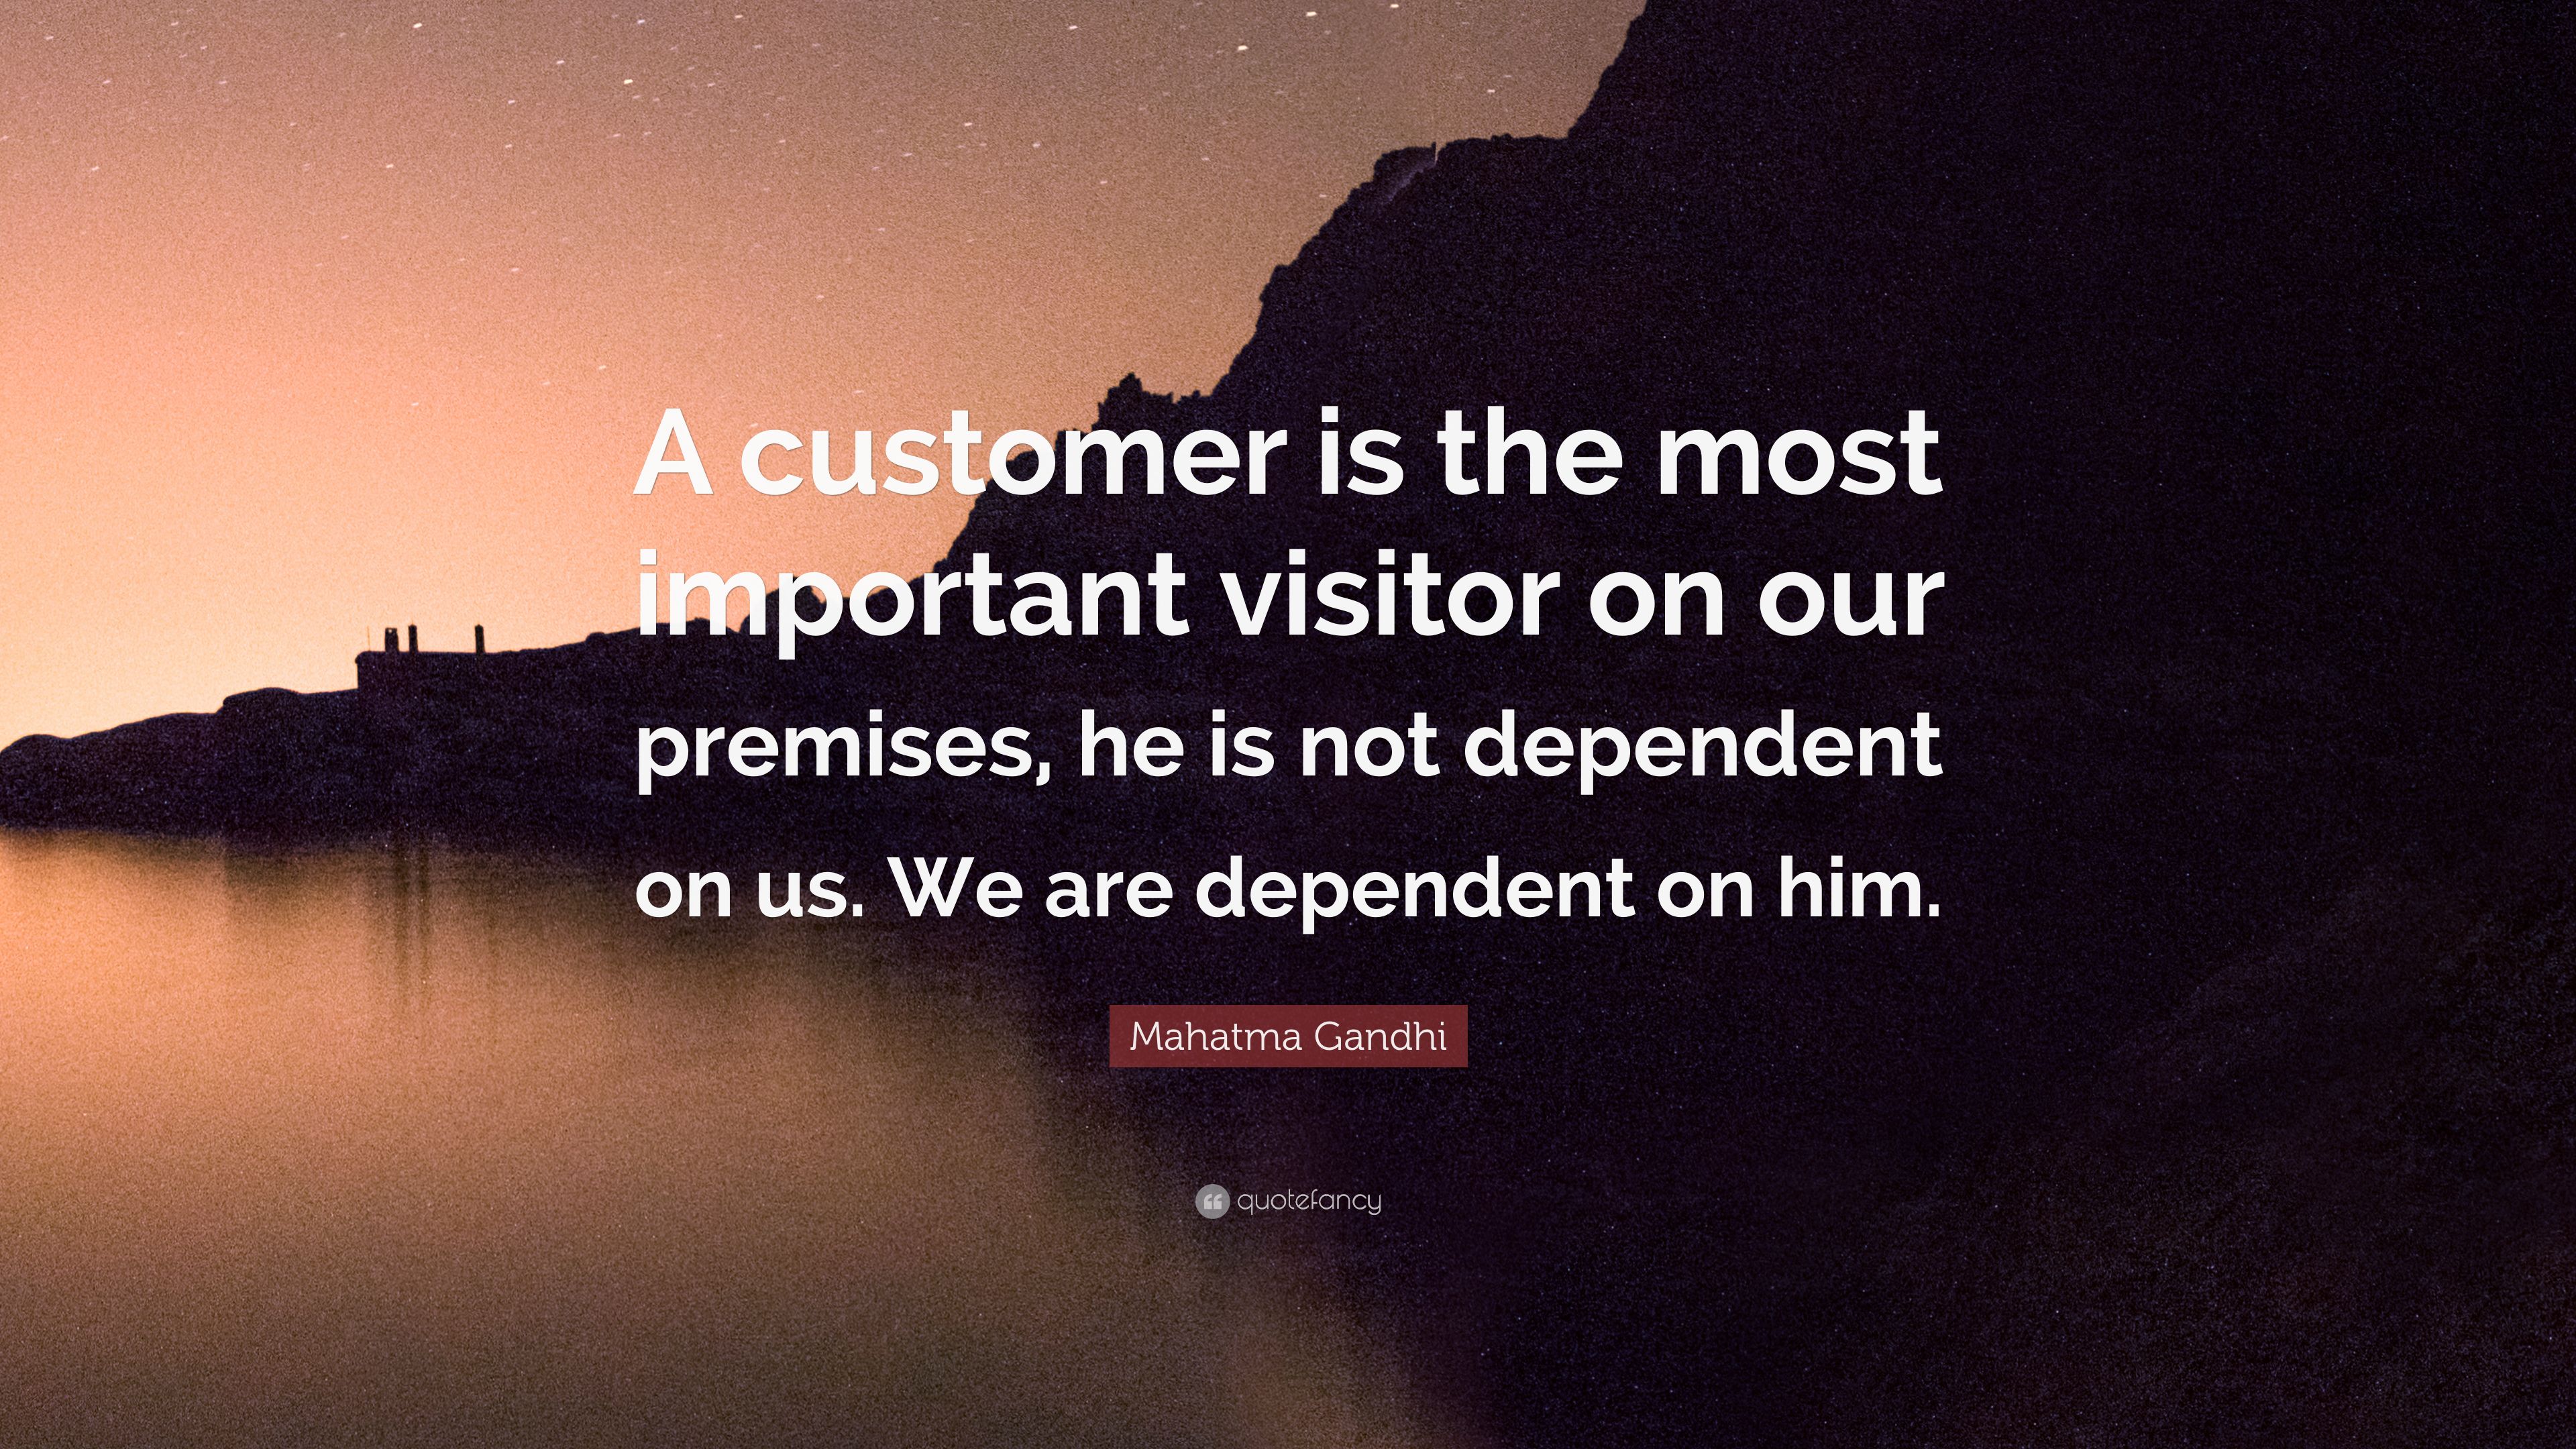 Mahatma Gandhi Quote: “A customer is the most important visitor